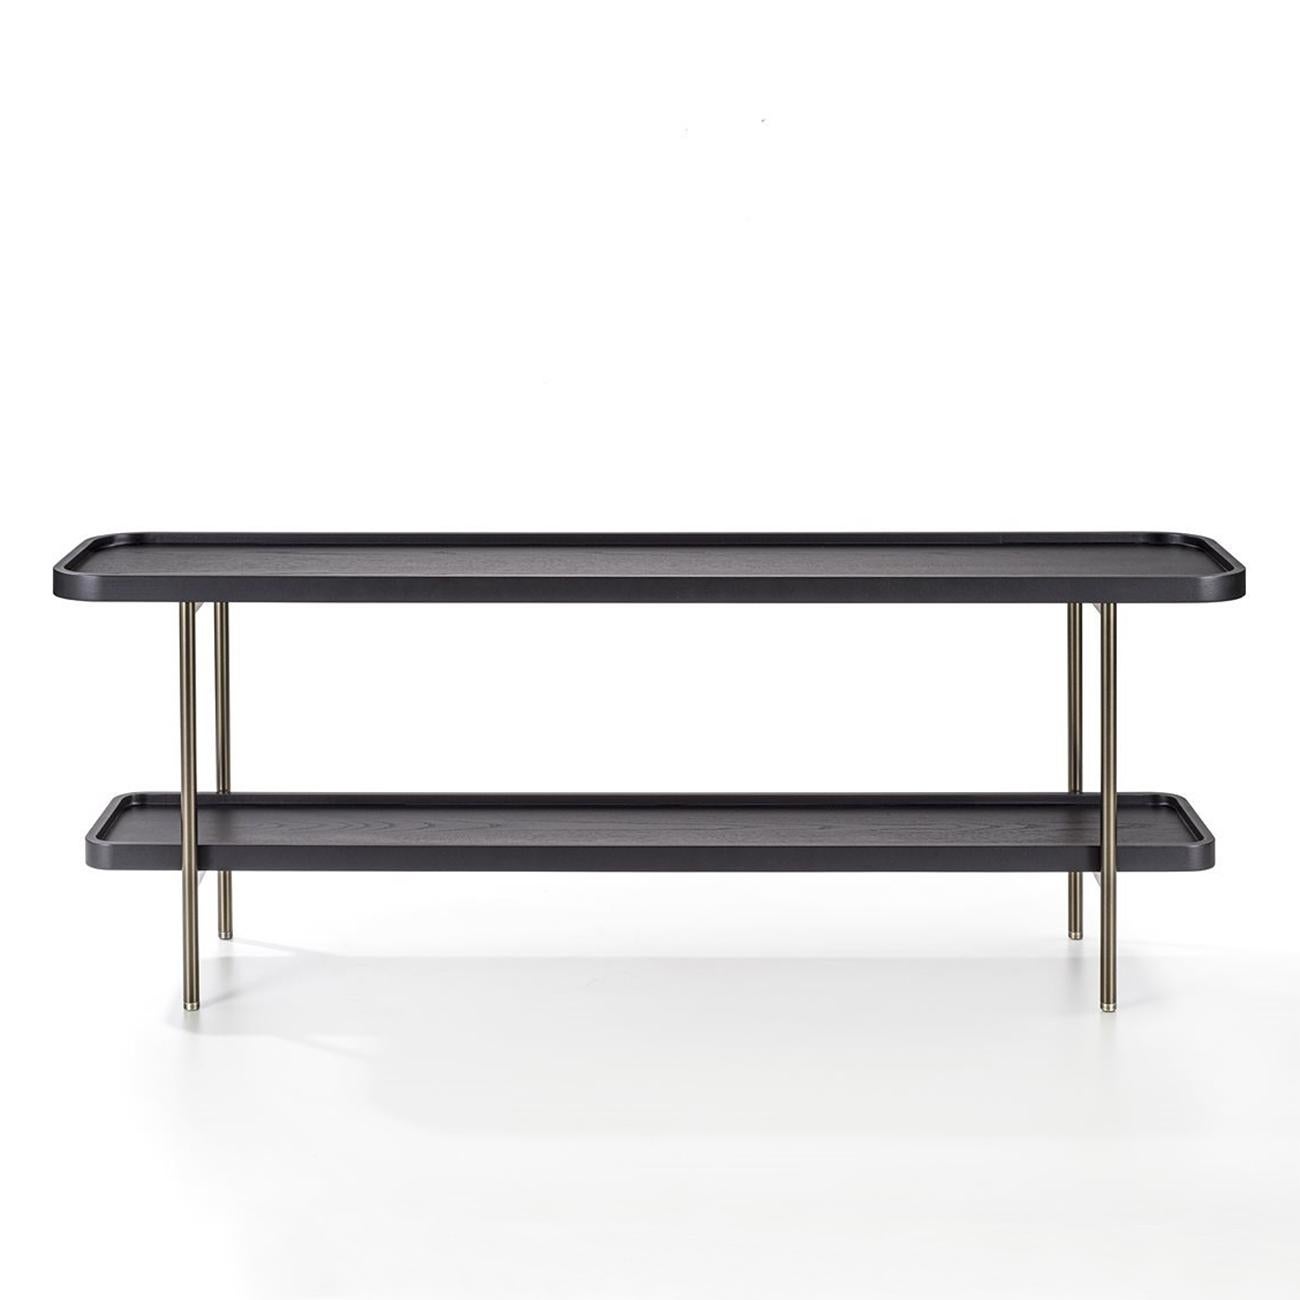 Console table black ash tops with structure
And feet in solid bronze. With up and down tops
In solid ash wood stained in black finish.
Also available in natural ash finish on request.